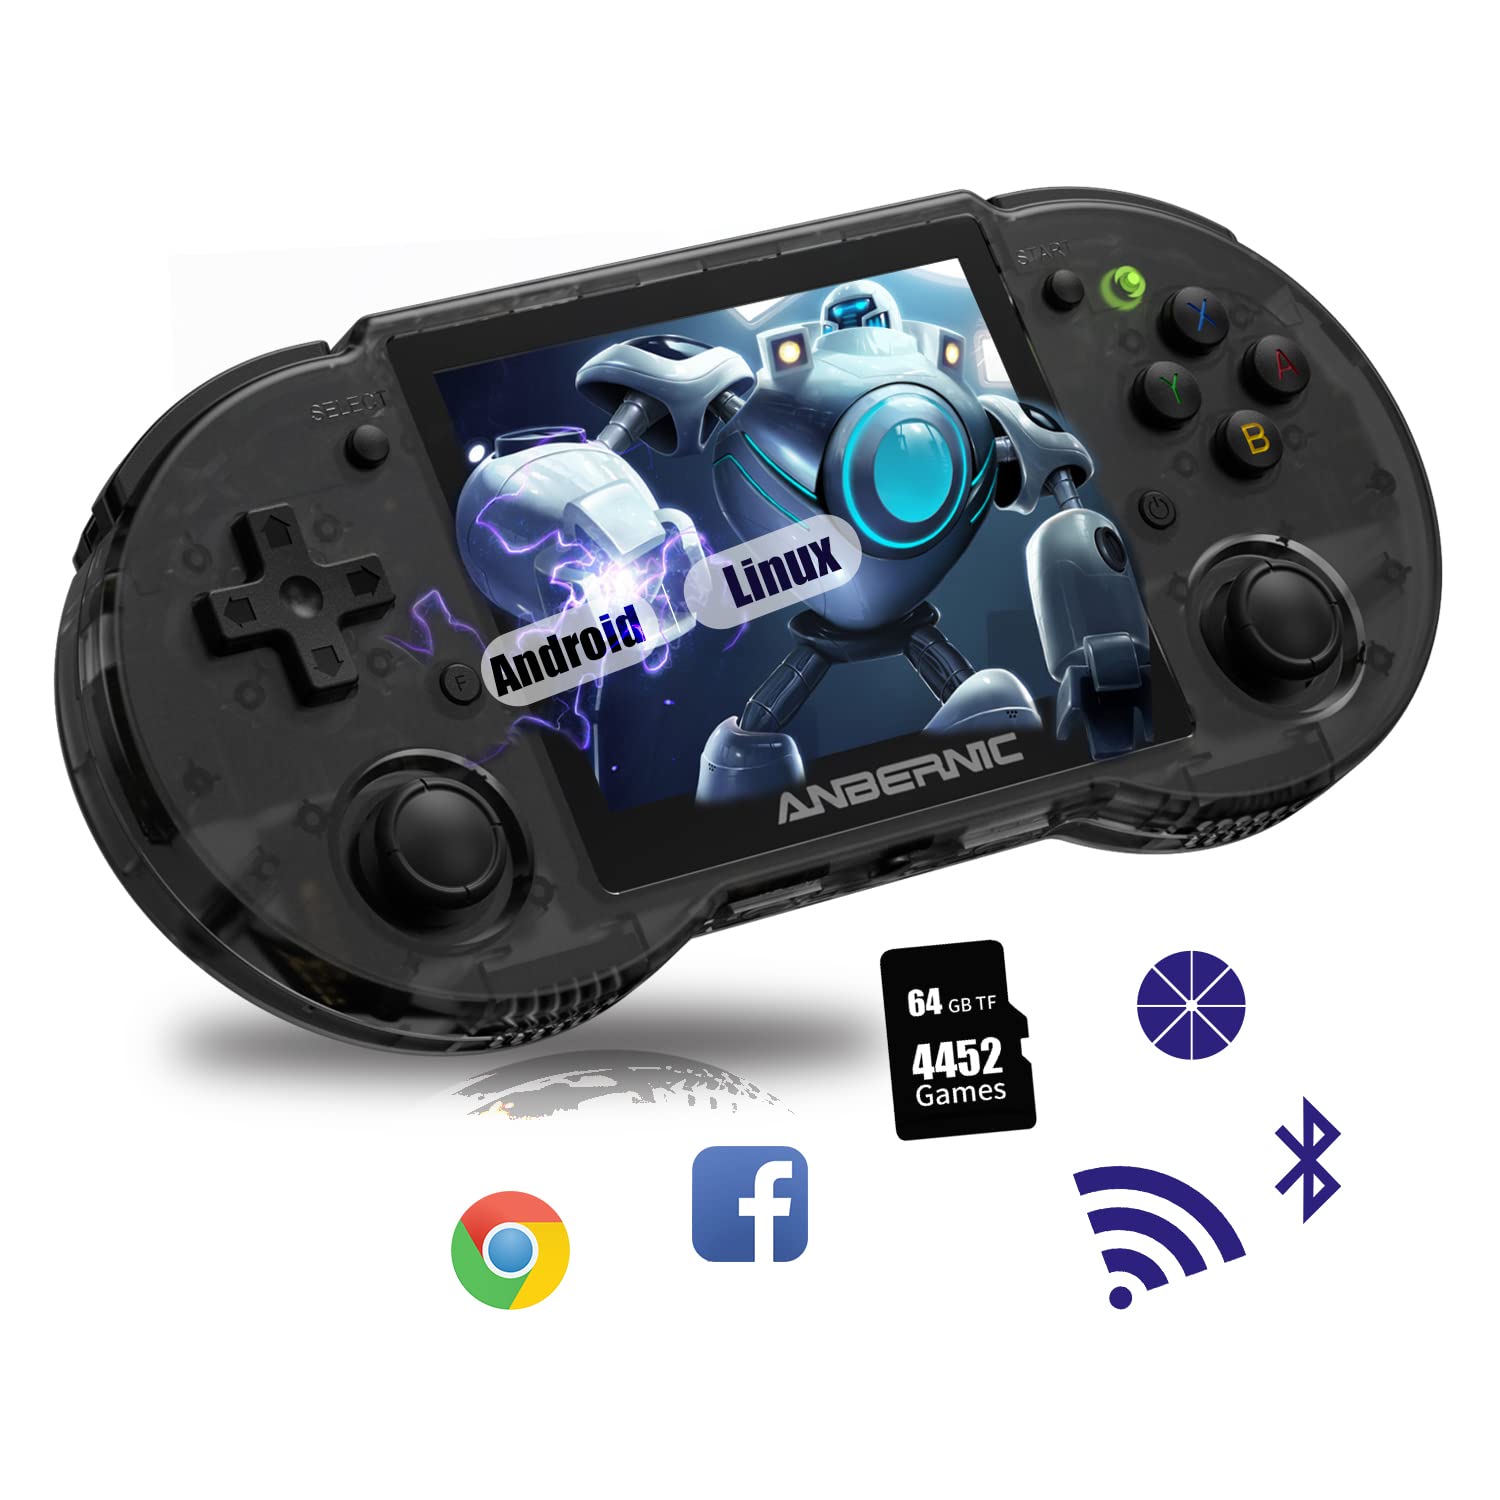 RG353P Retro Handheld Game Console pre-Installed 4452 Games with 64G TF Card, Dual OS Android 11 has Multi Touch, Linux Support Handle Mode, RG353P with 5G WiFi 4.2 Bluetooth (RG353P-Black-latest)